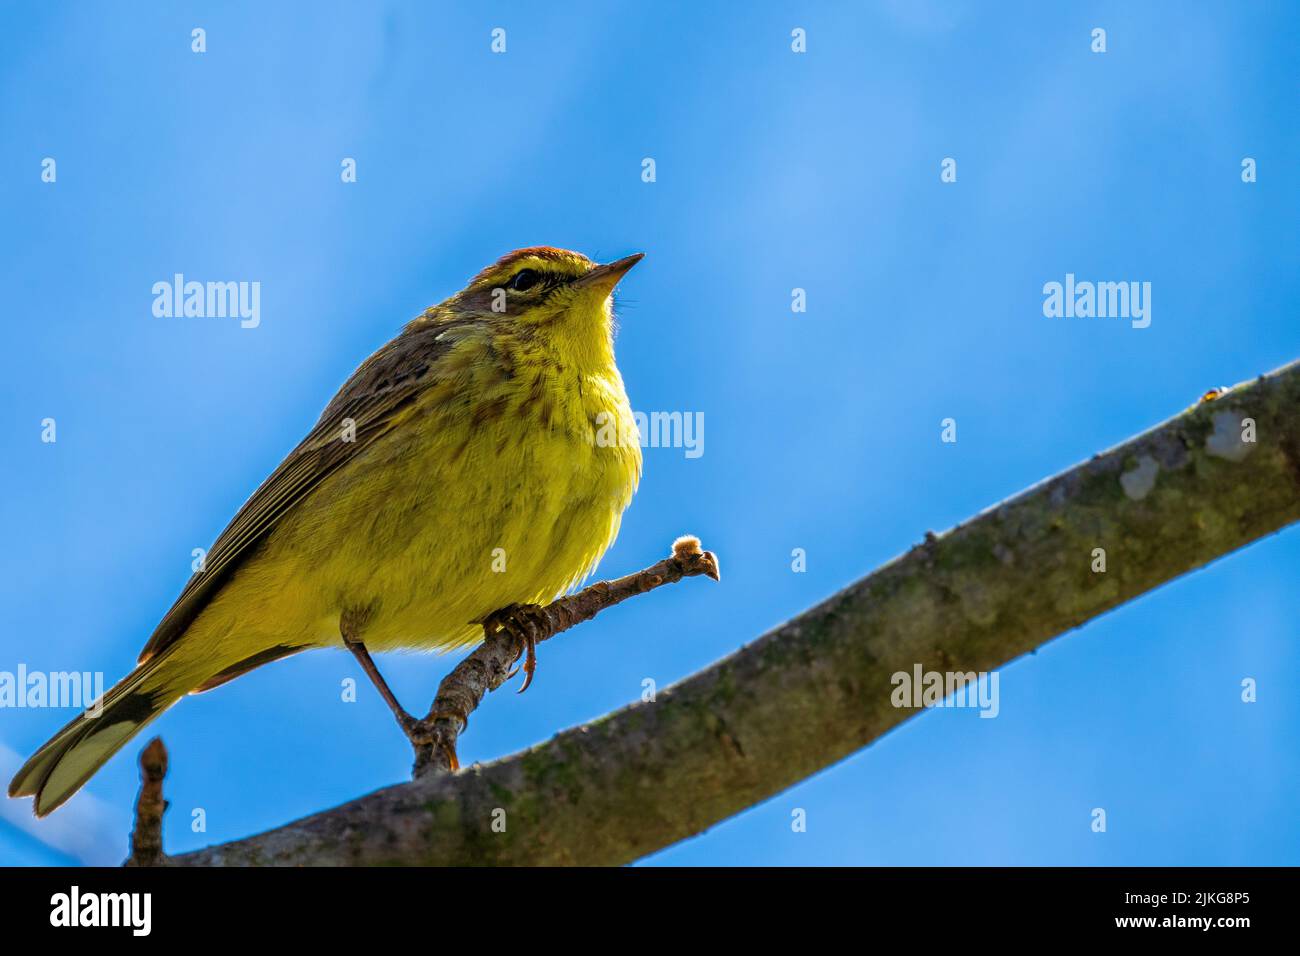 A yellow palm warbler perched on a tree branch Stock Photo